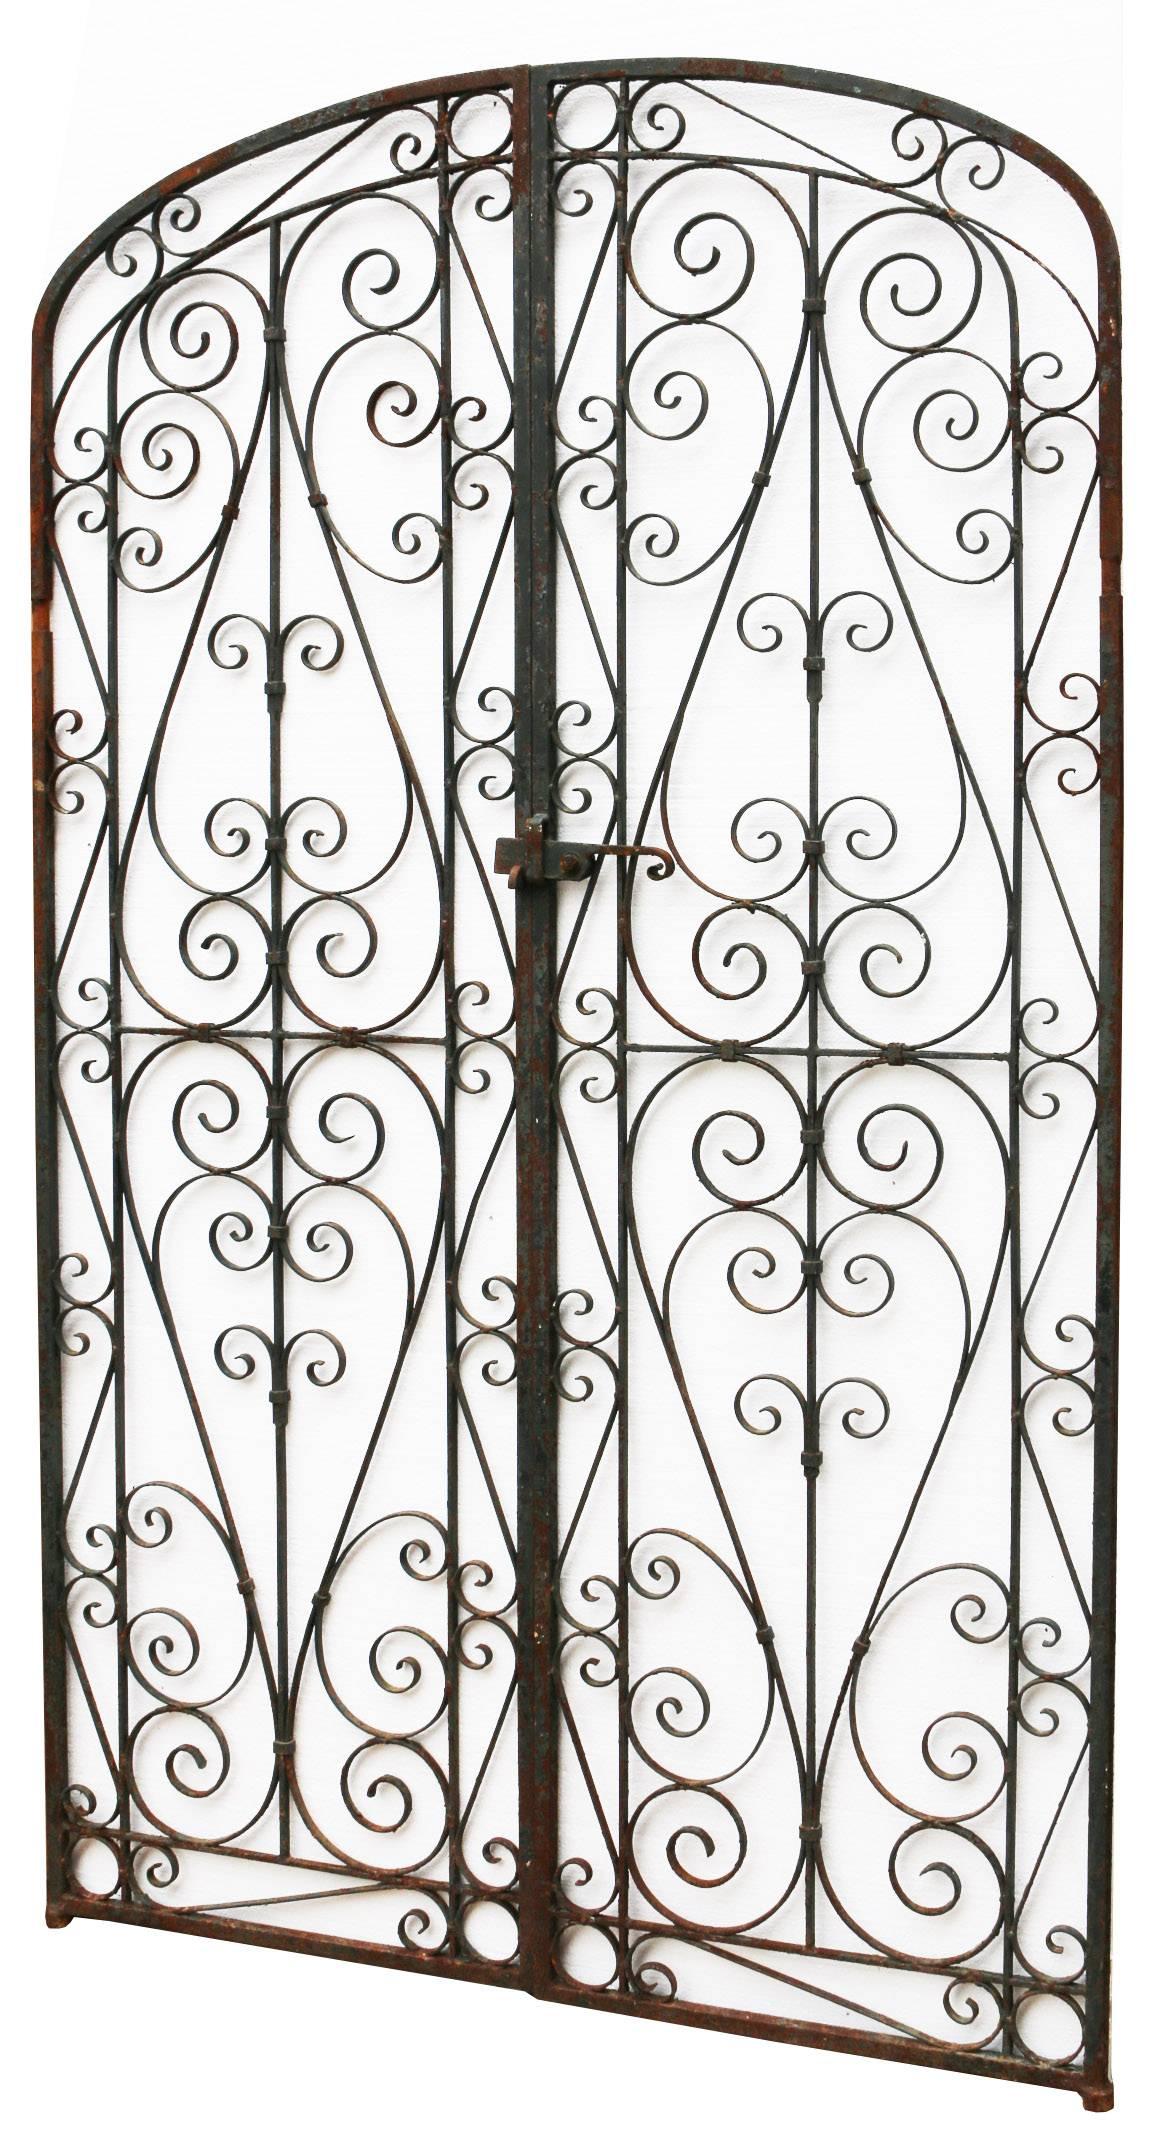 These gates have surface rust and would require sand blasting and painting. There is a working latch, no hinges.
Weight 27 kg.